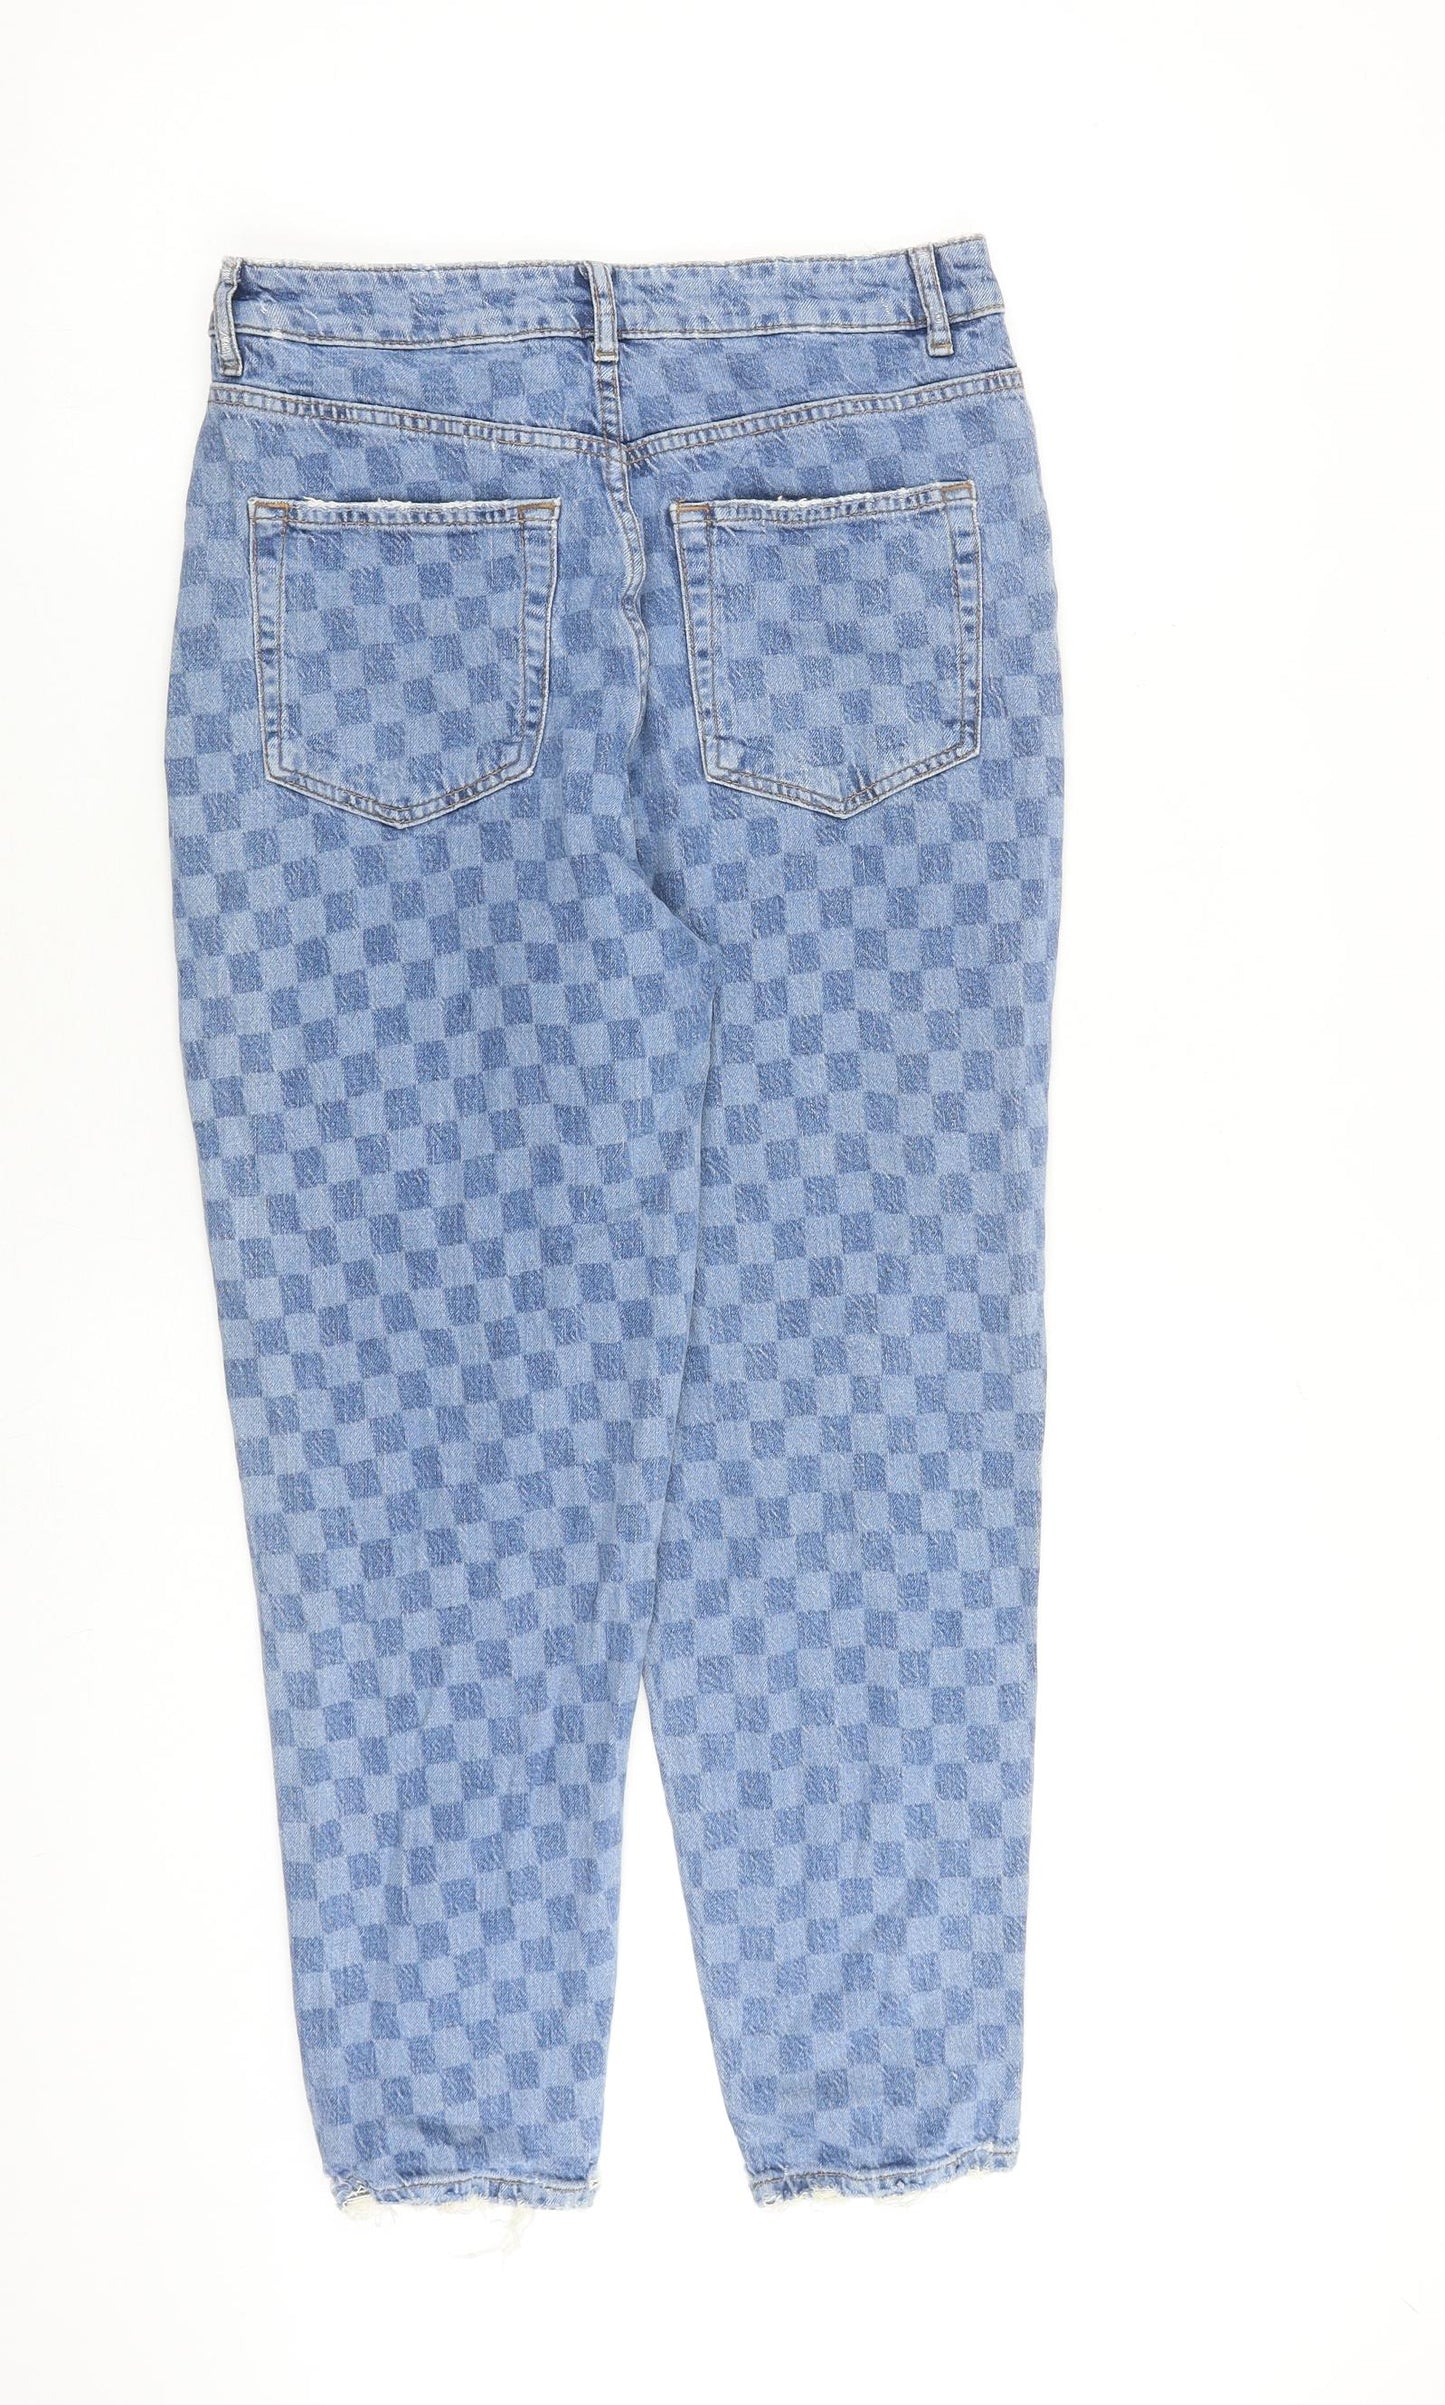 George Womens Blue Check Cotton Mom Jeans Size 12 L26 in Regular Zip